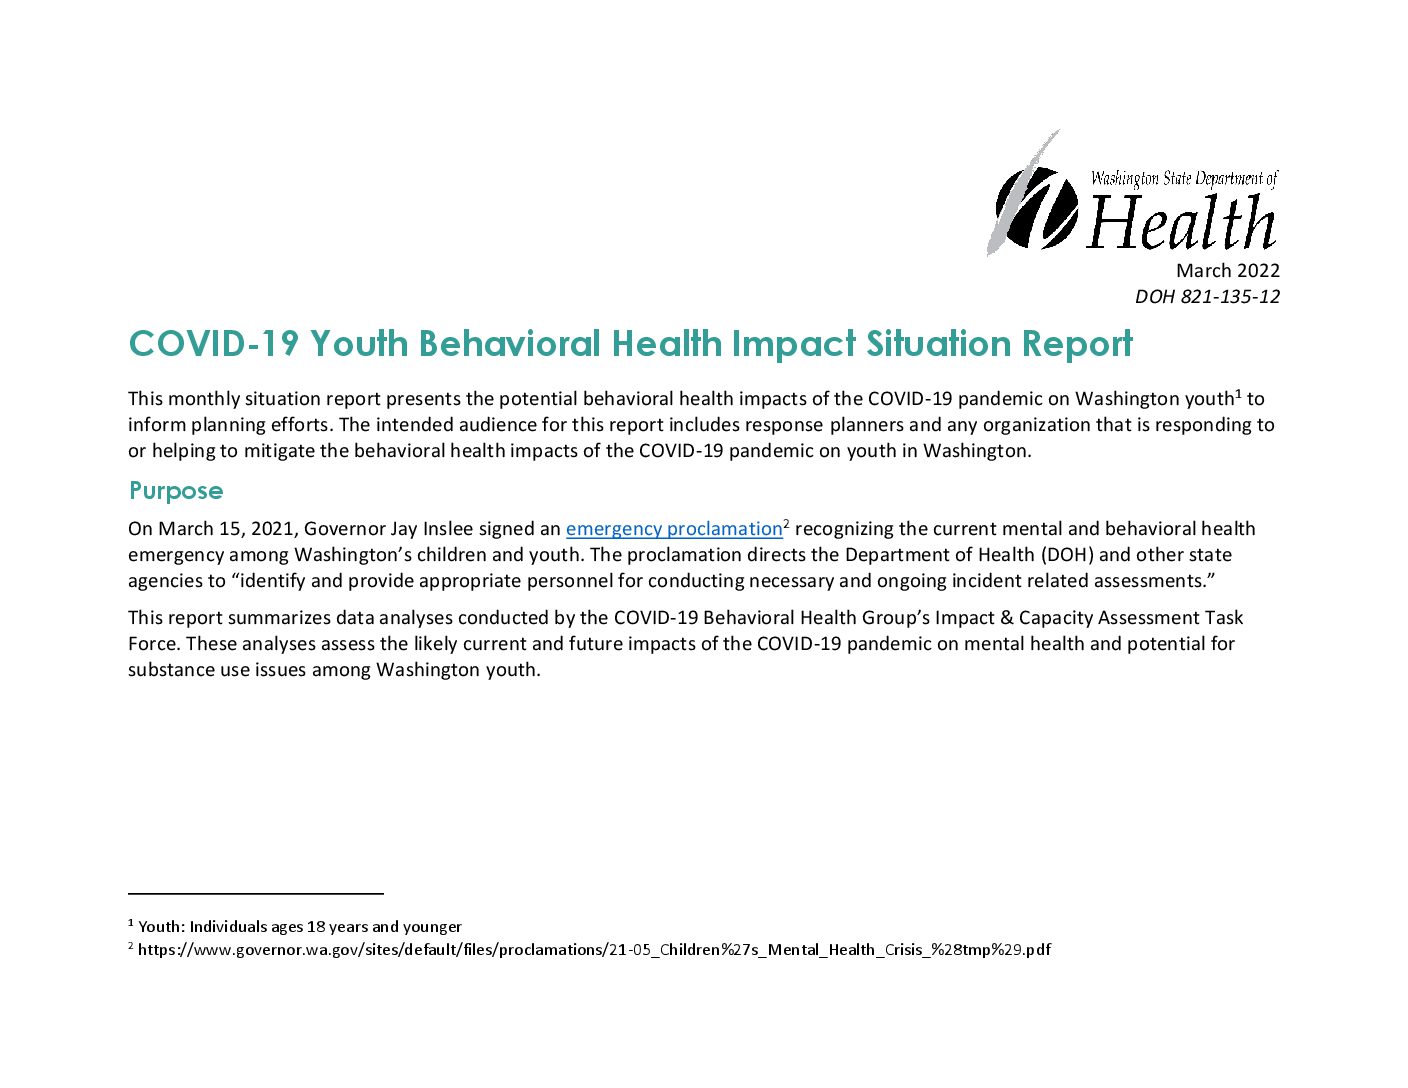 COVID-19 Youth Behavioral Health Impact SitRep12_FINAL